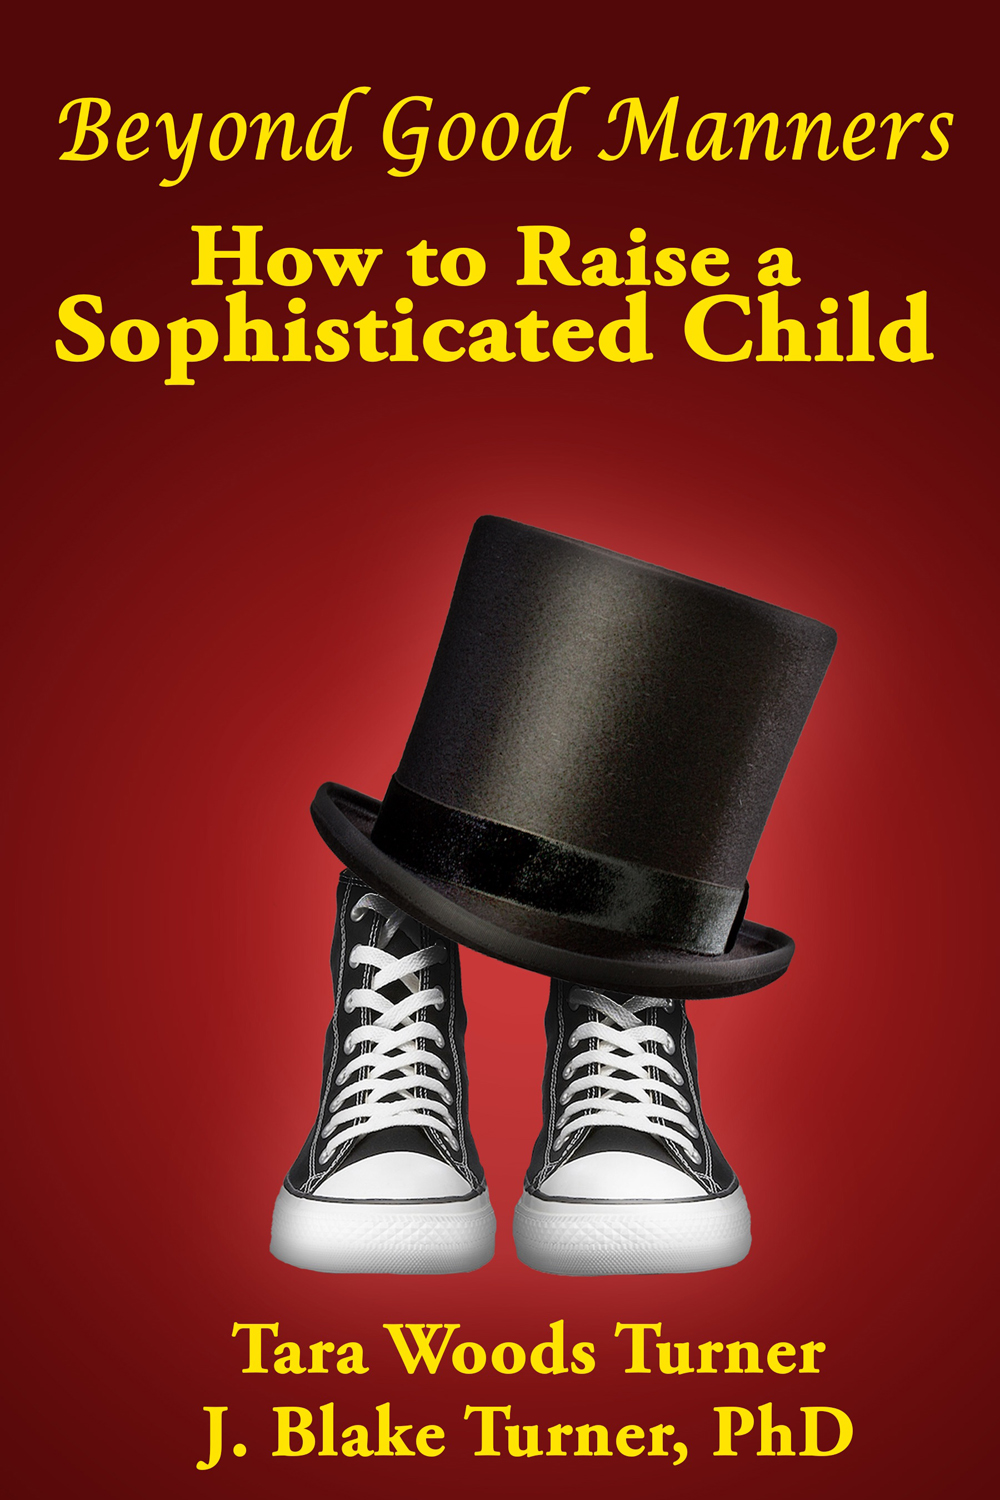 Special excerpt from Beyond Good Manners: How to Raise a Sophisticated Child